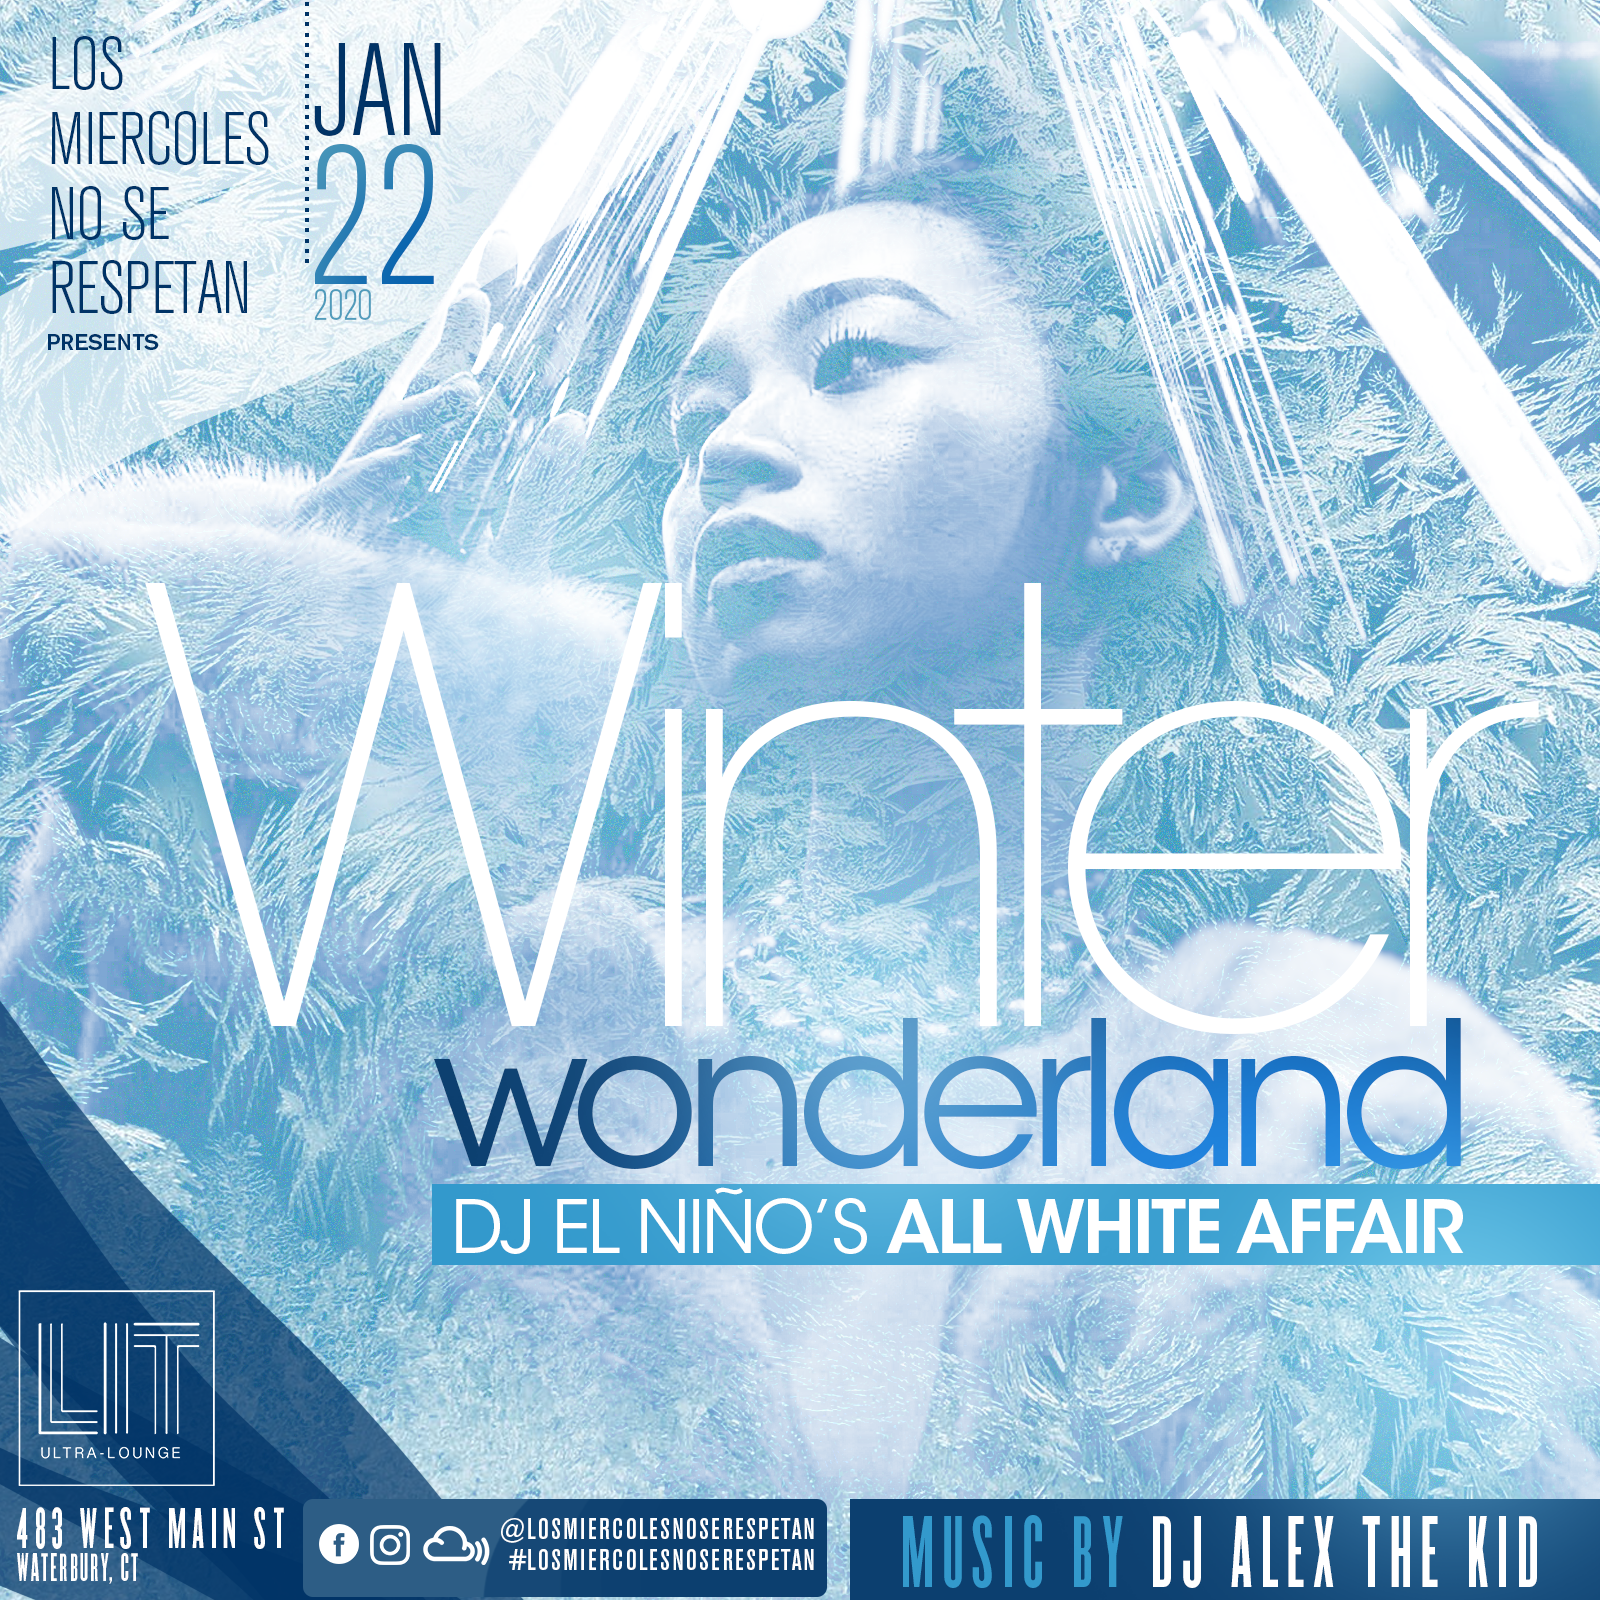 All White Party In Lit Ultra Lounge